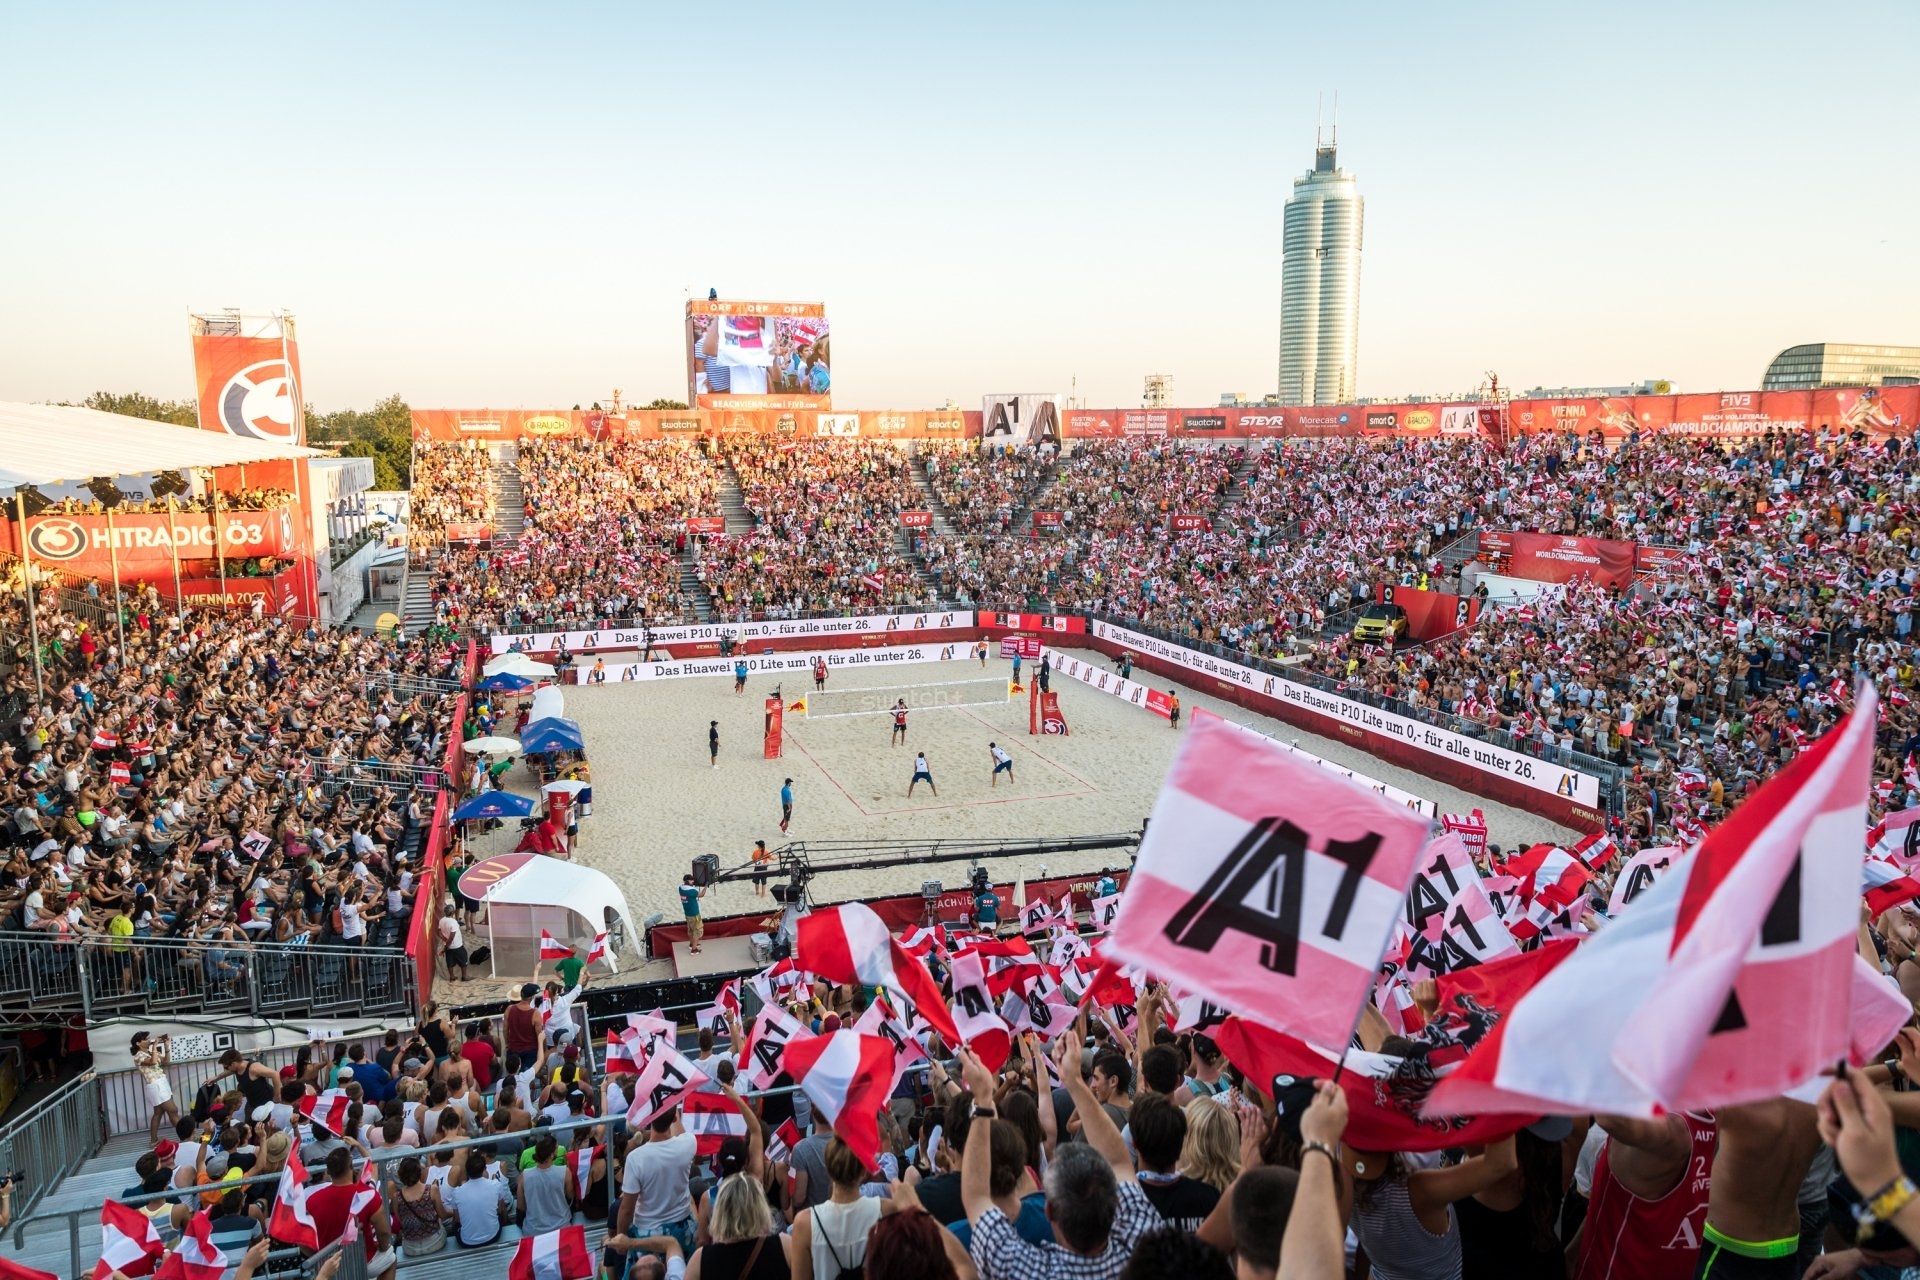 The Red Bull Beach Arena will be packed once again this week in Vienna